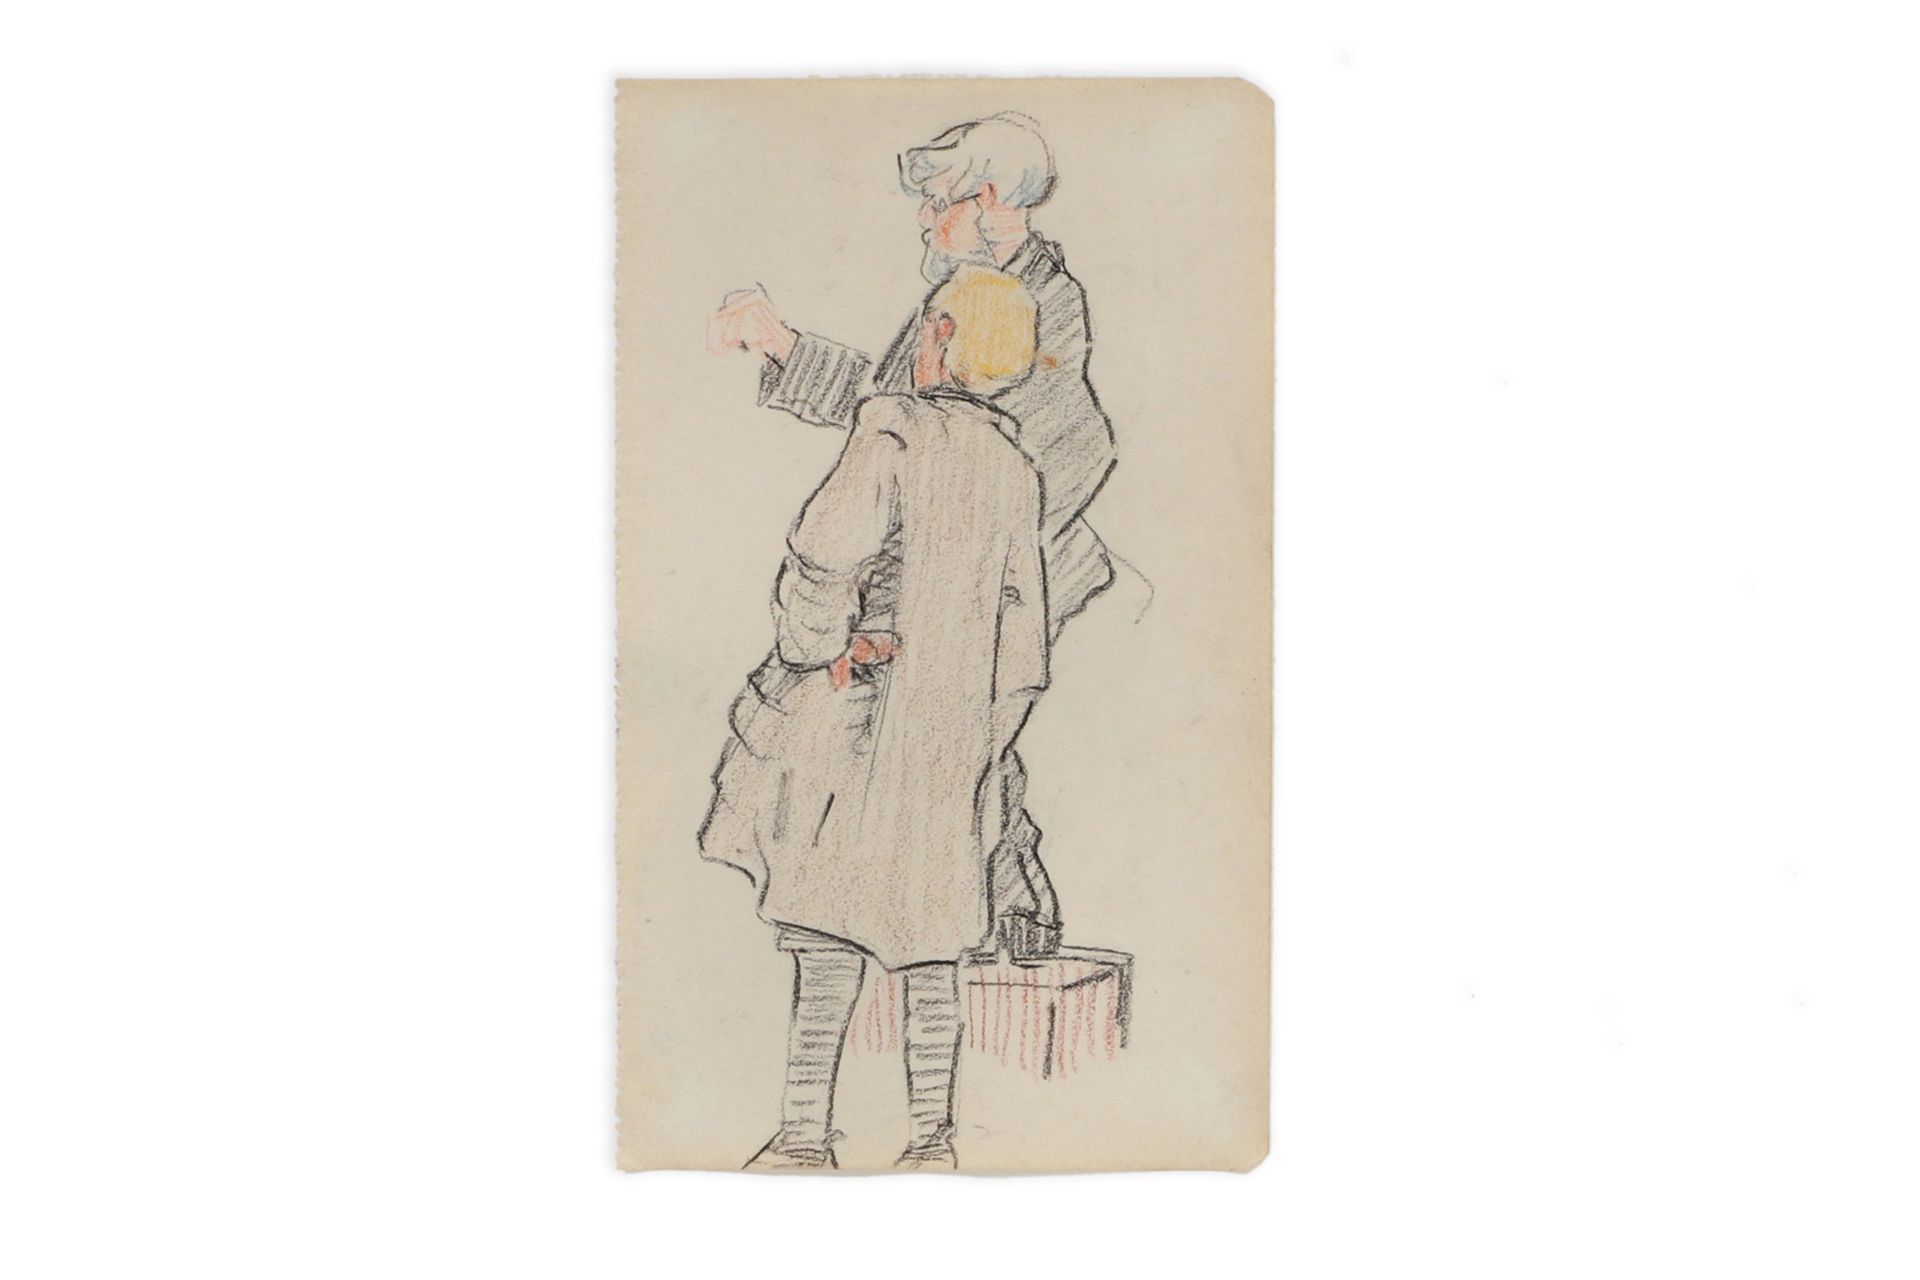 MARY SWANZY, HRHA (Irl 1882 - 1978) "The Drawing lesson", ca 1905, coloured pencil drawing, ca 11.